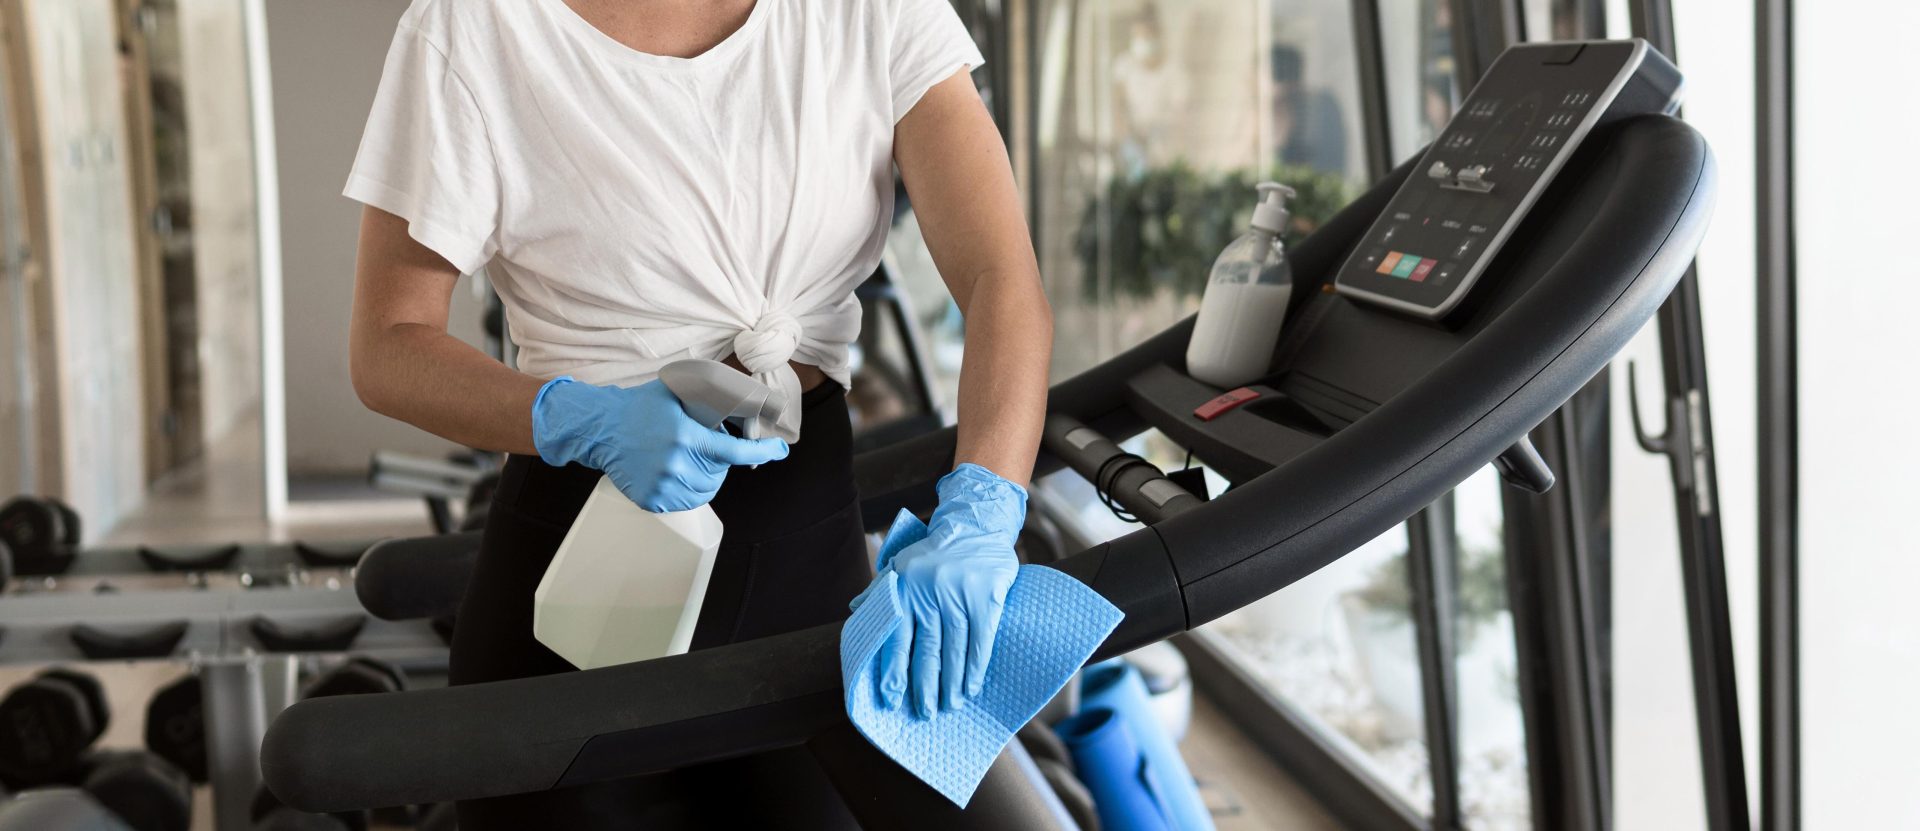 how to maintain cleanliness in gyms